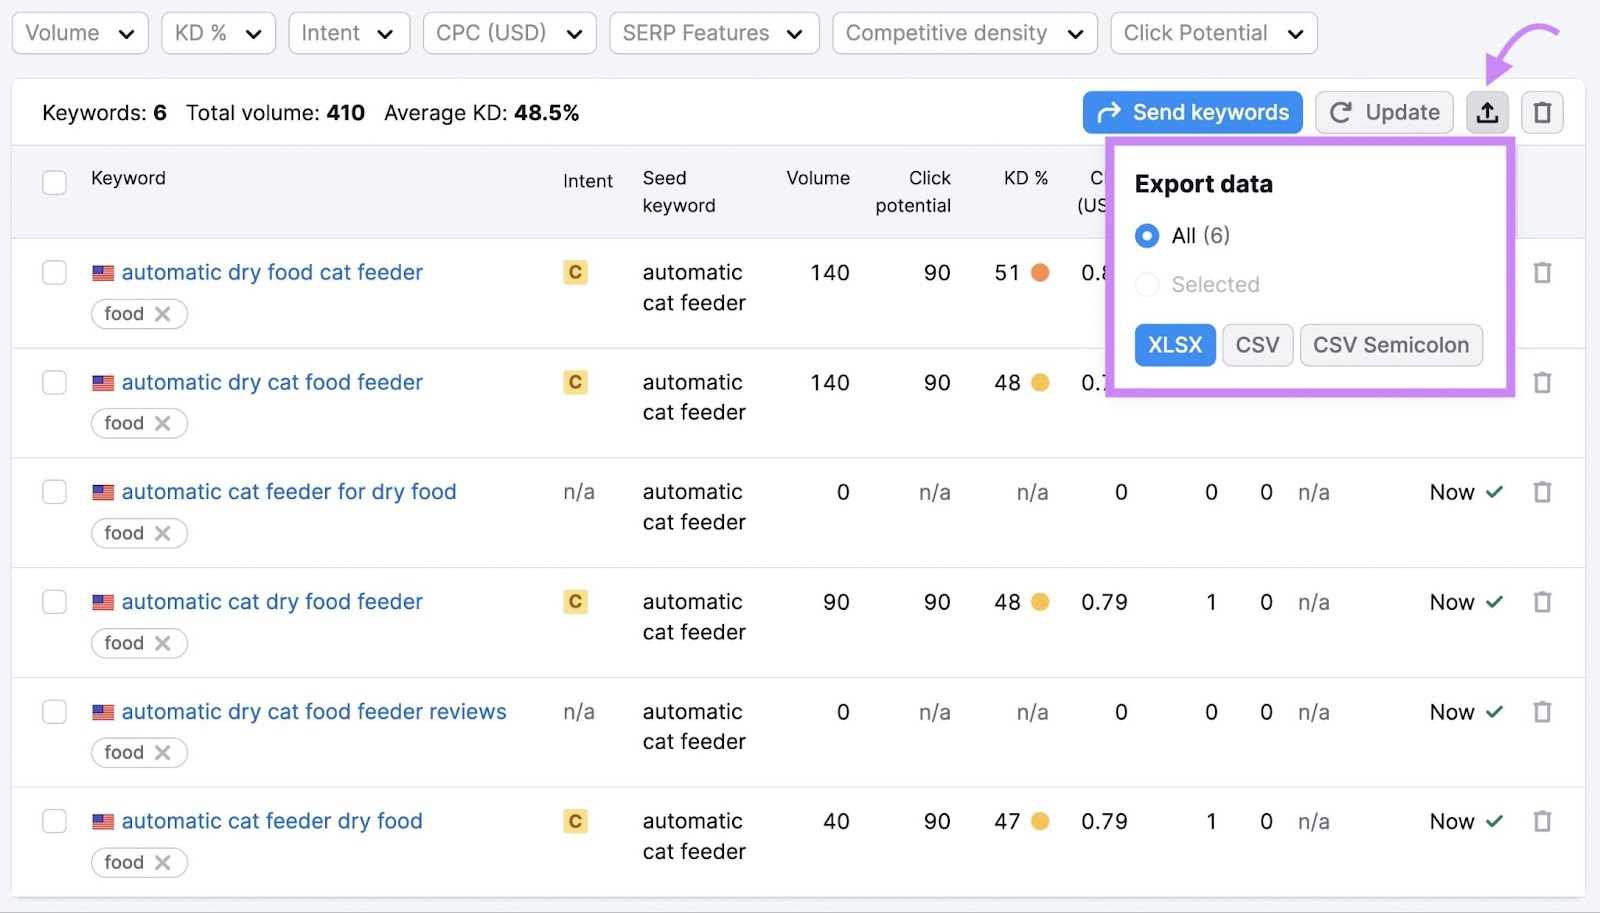 Exporting the keyword list in Keyword Manager